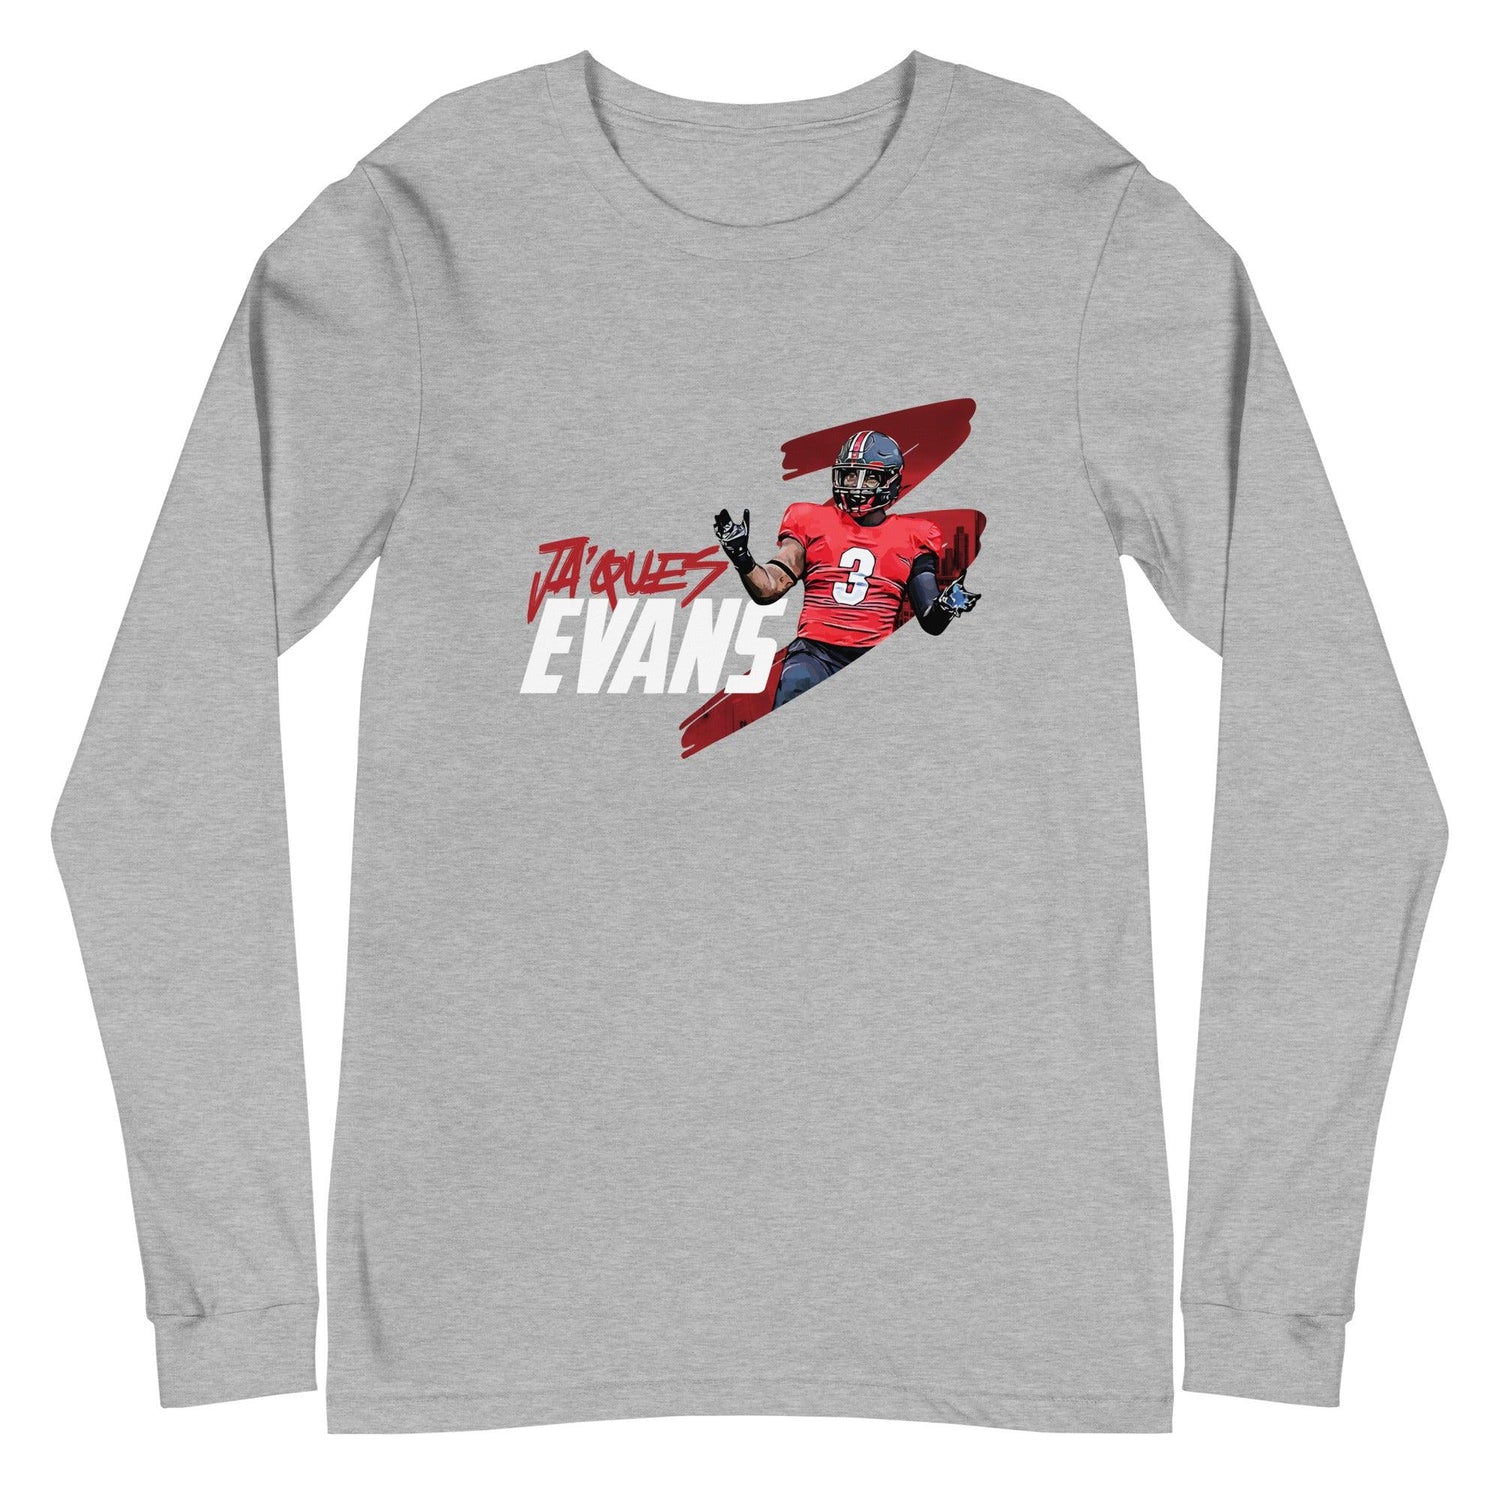 Jaques Evans "Gameday" Long Sleeve Tee - Fan Arch